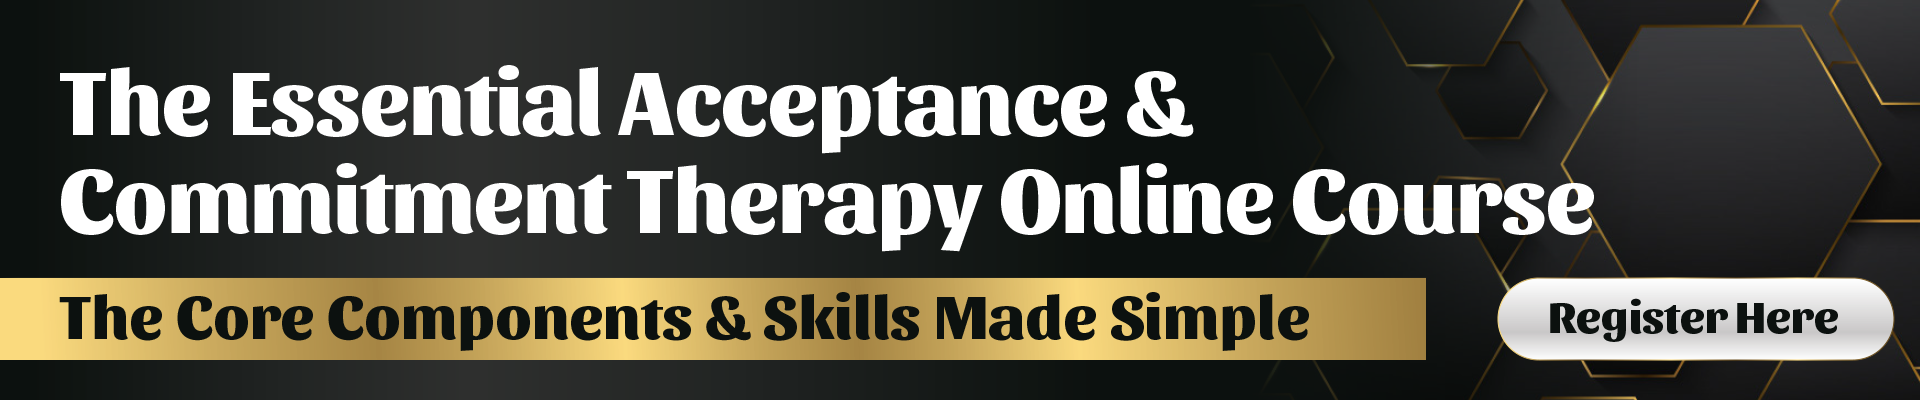 The Essential Acceptance and Commitment Therapy Online Course